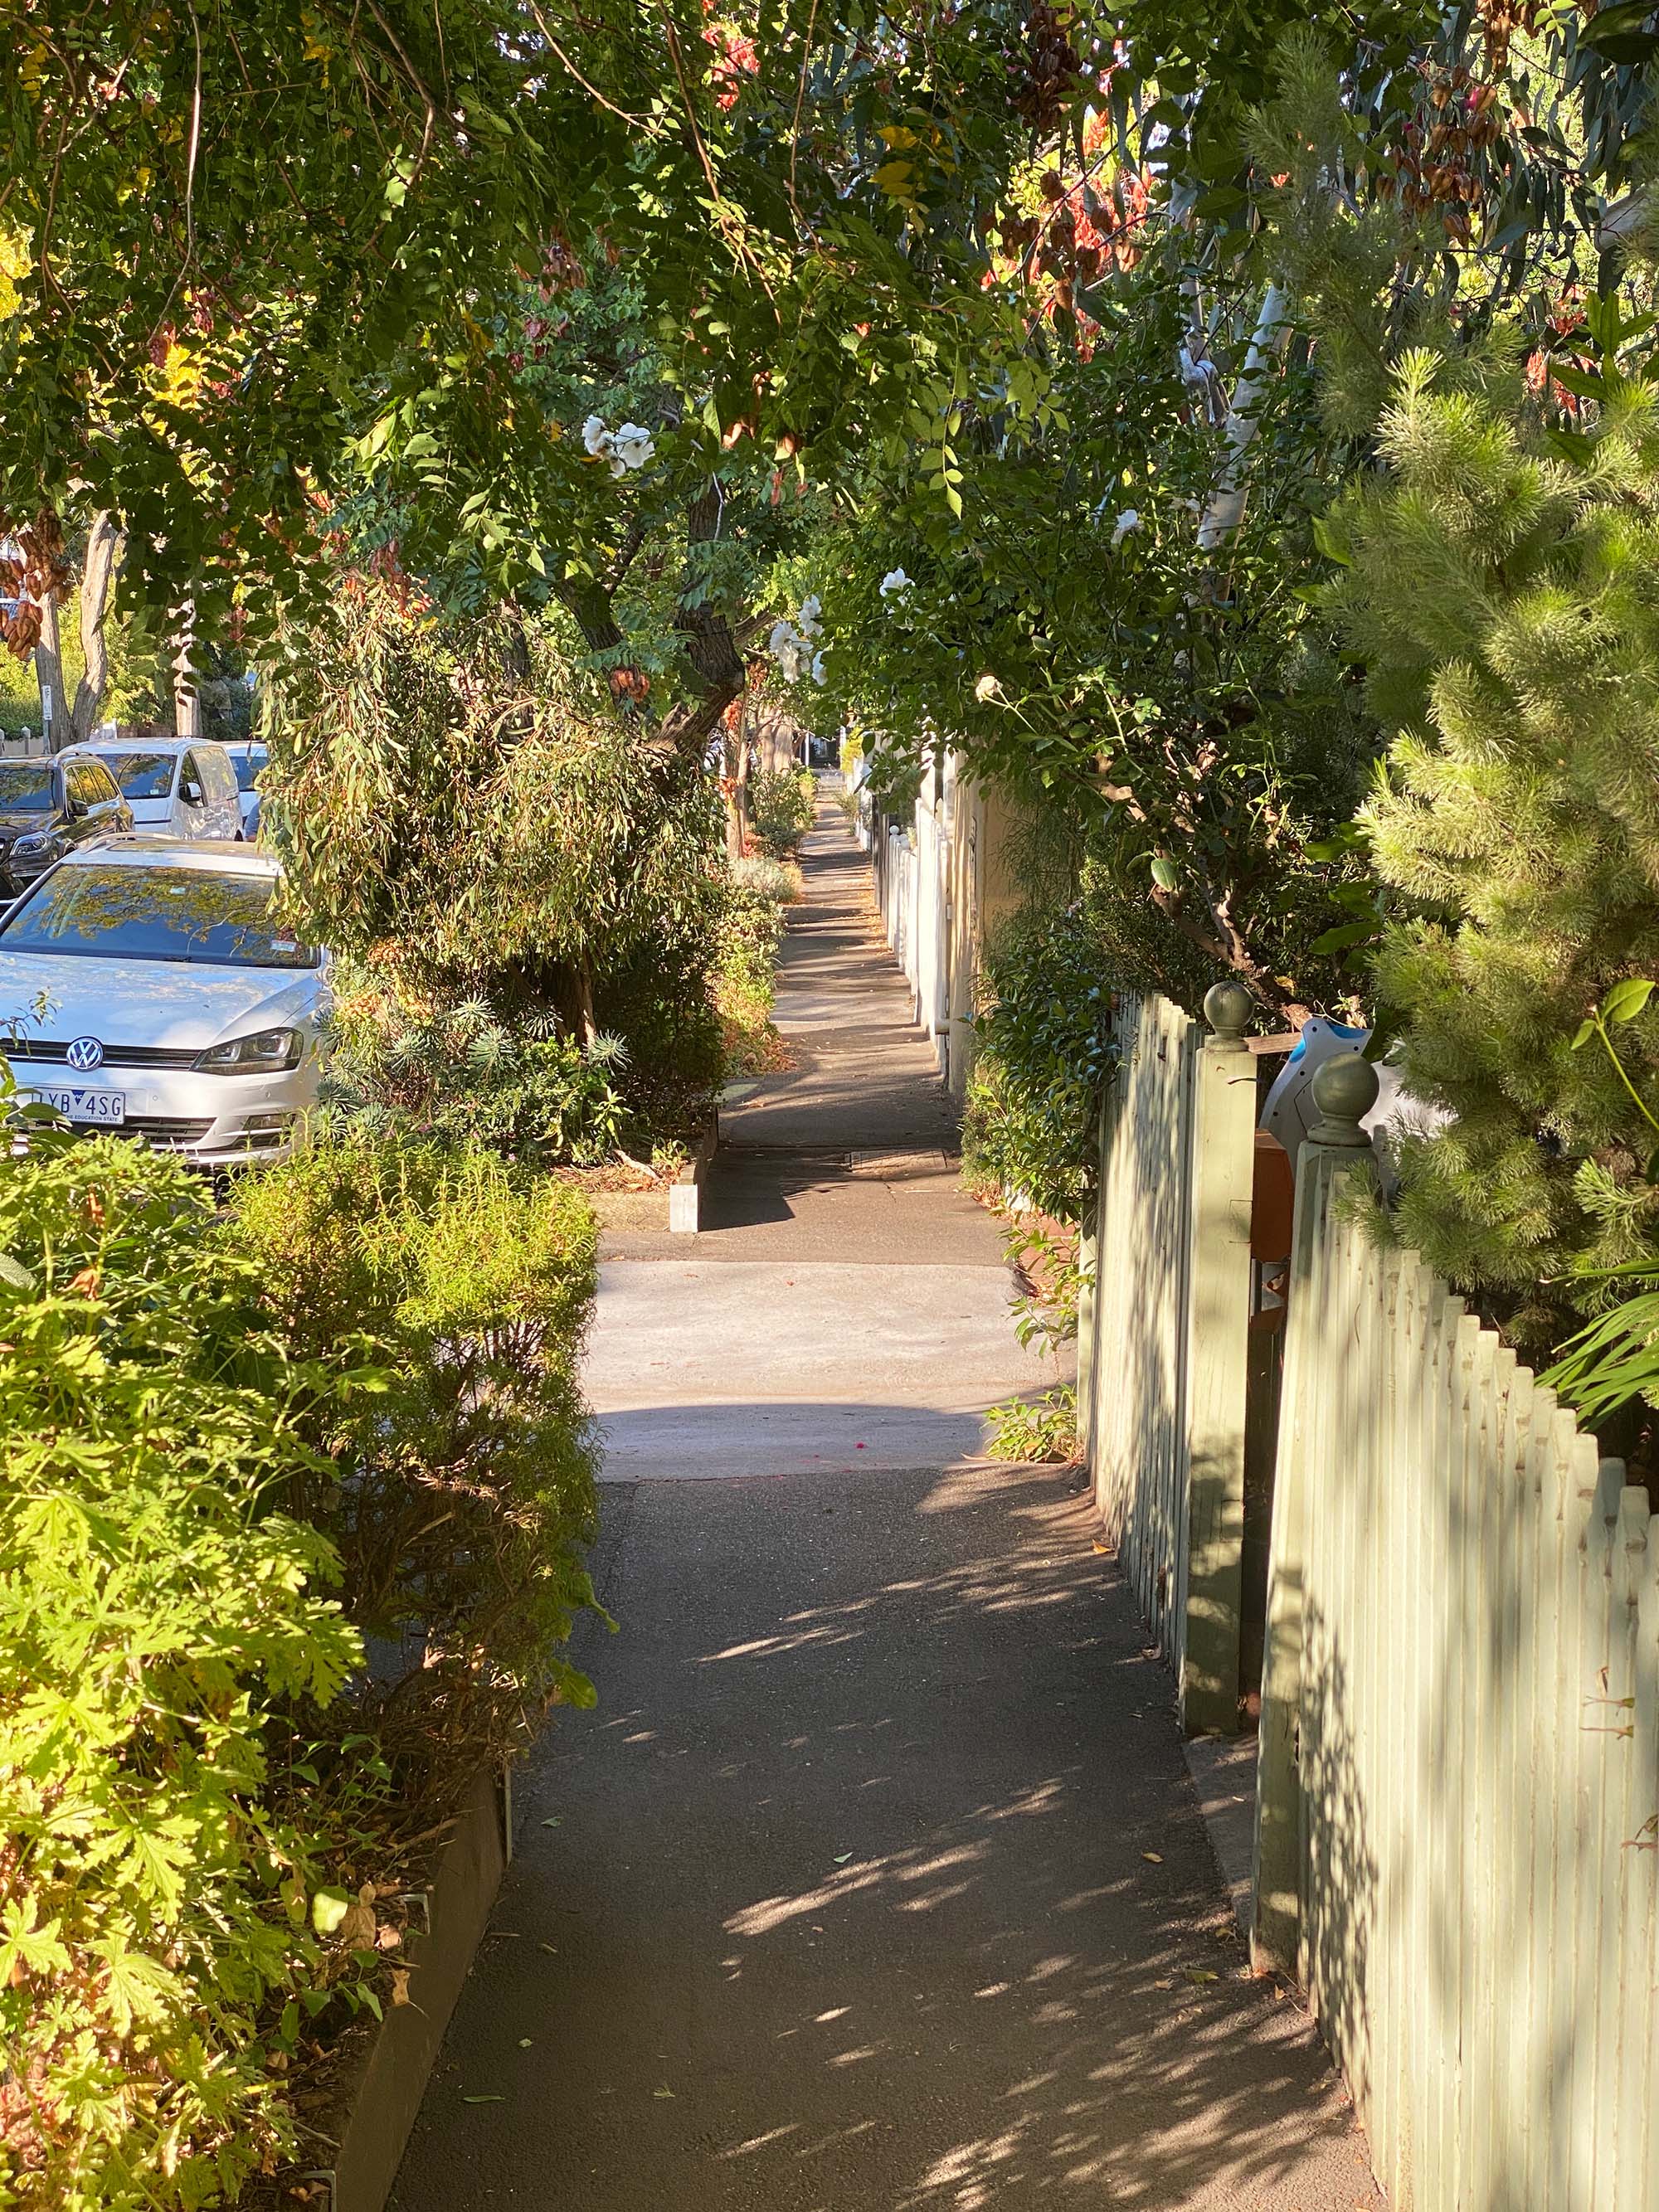 The pollinator corridor project that’s transforming Melbourne’s streets